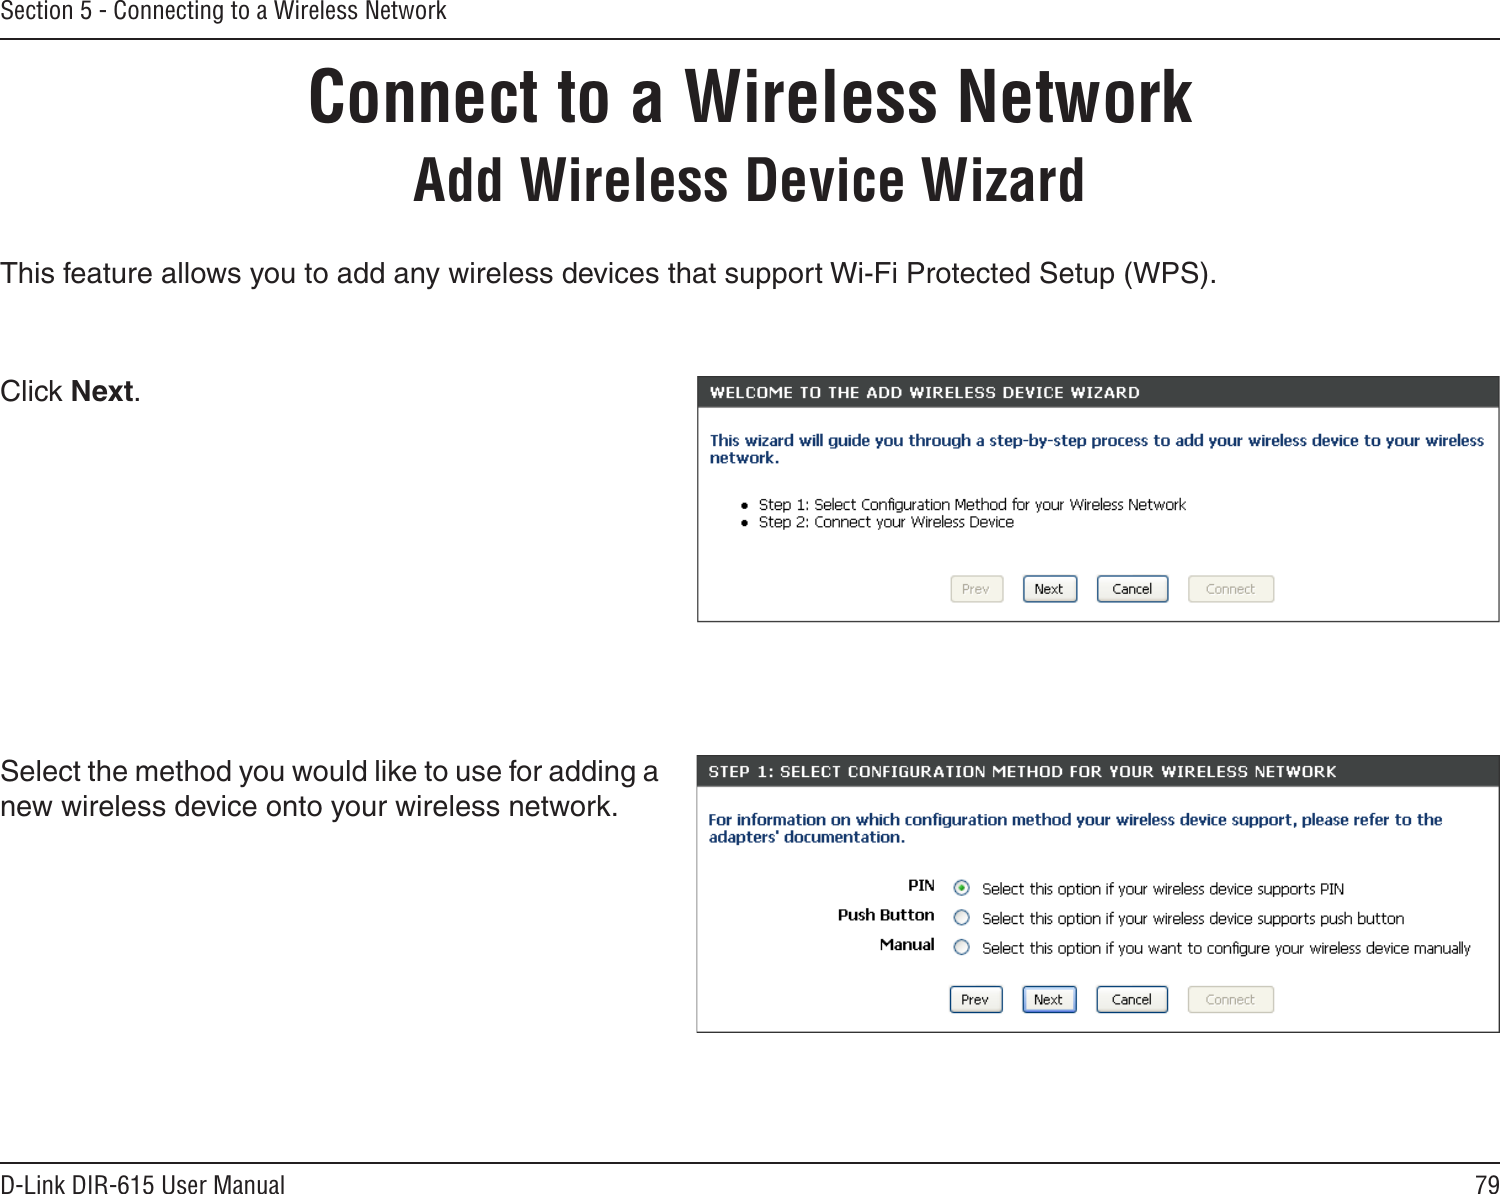 79D-Link DIR-615 User ManualSection 5 - Connecting to a Wireless NetworkConnect to a Wireless NetworkAdd Wireless Device WizardThis feature allows you to add any wireless devices that support Wi-Fi Protected Setup (WPS).Select the method you would like to use for adding a new wireless device onto your wireless network.Click Next.